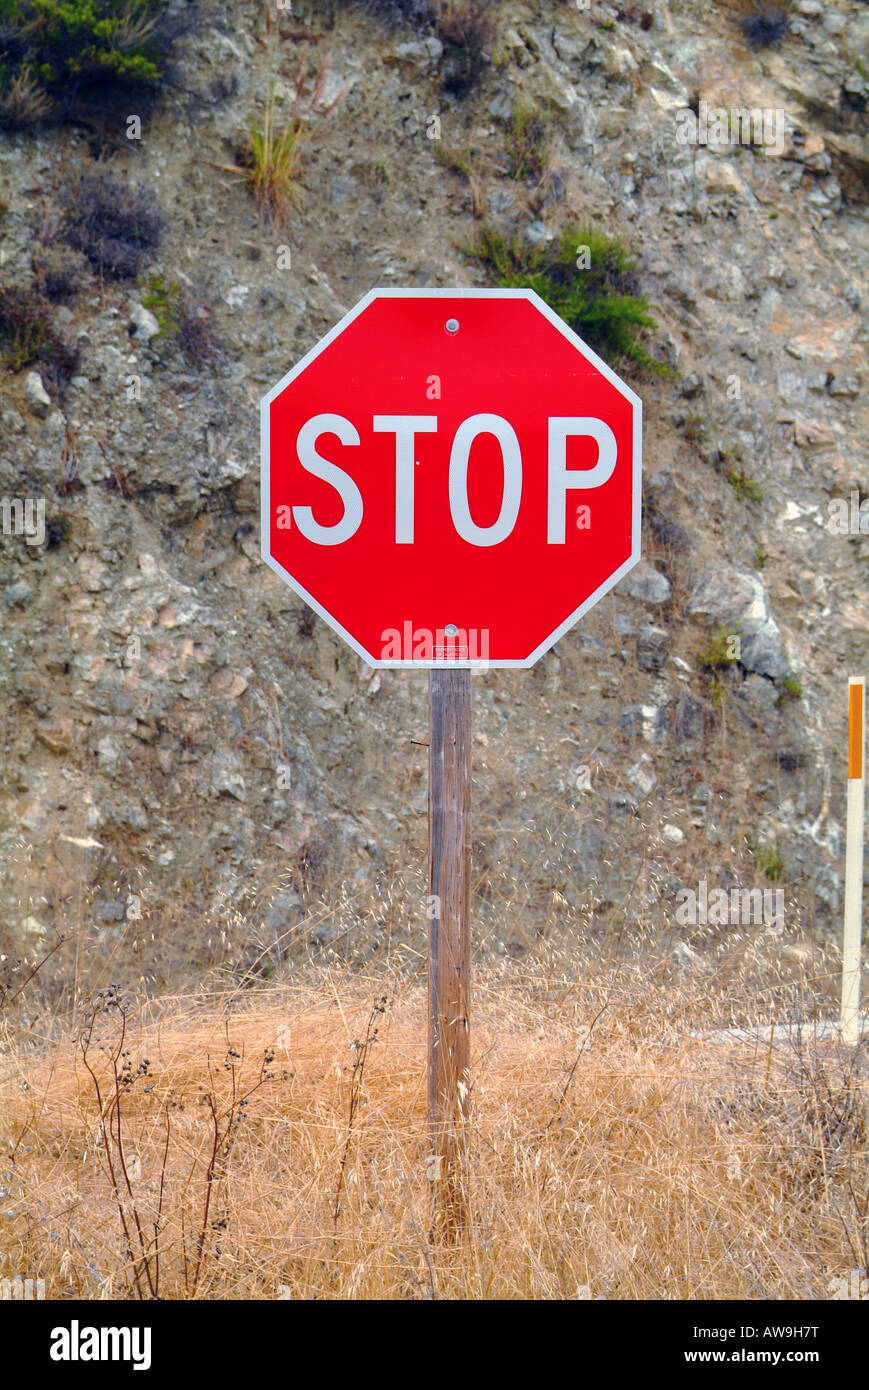 Red Stop signpost in California. Stock Photo